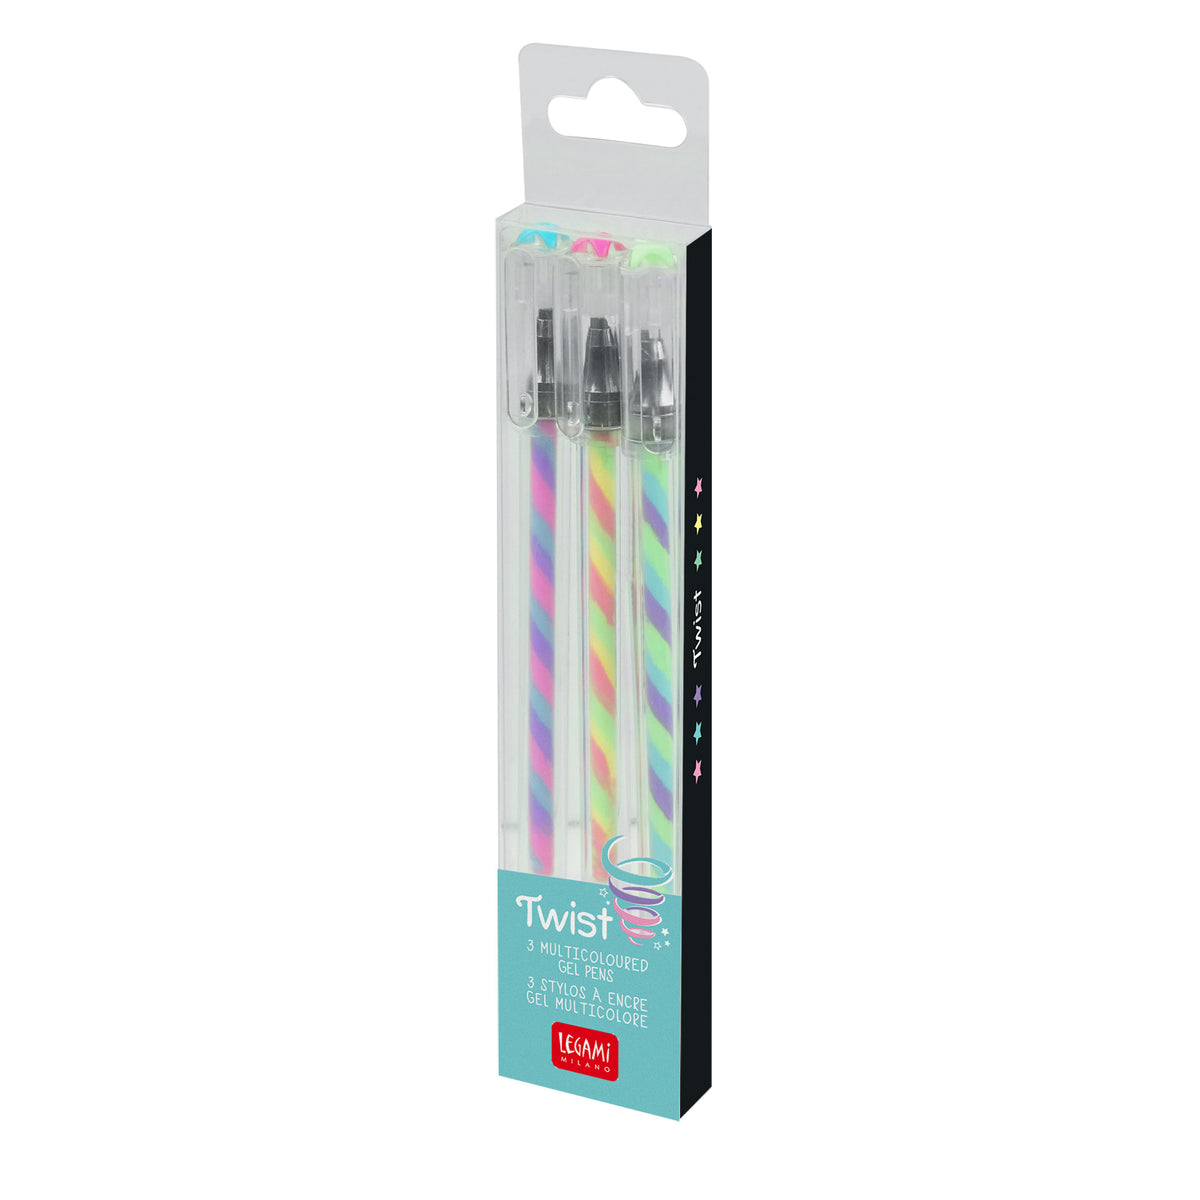 An image of the retail packaging for 3 twist gel pens.